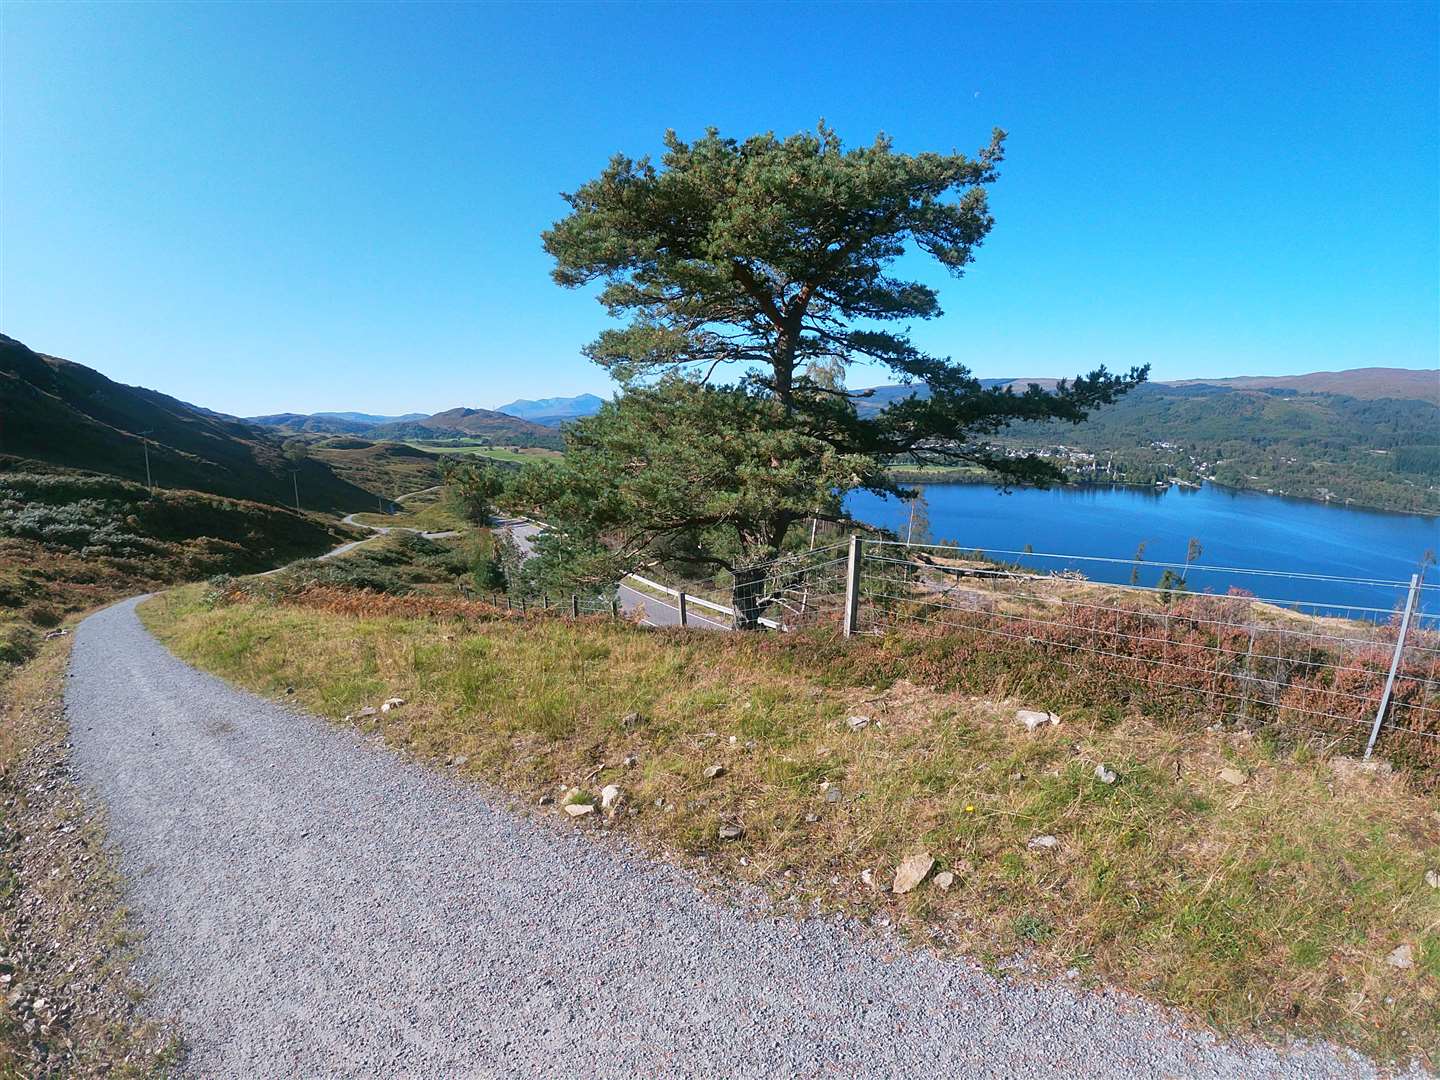 Looking over the military road back down to Fort Augustus from the South Loch Ness Trail path.